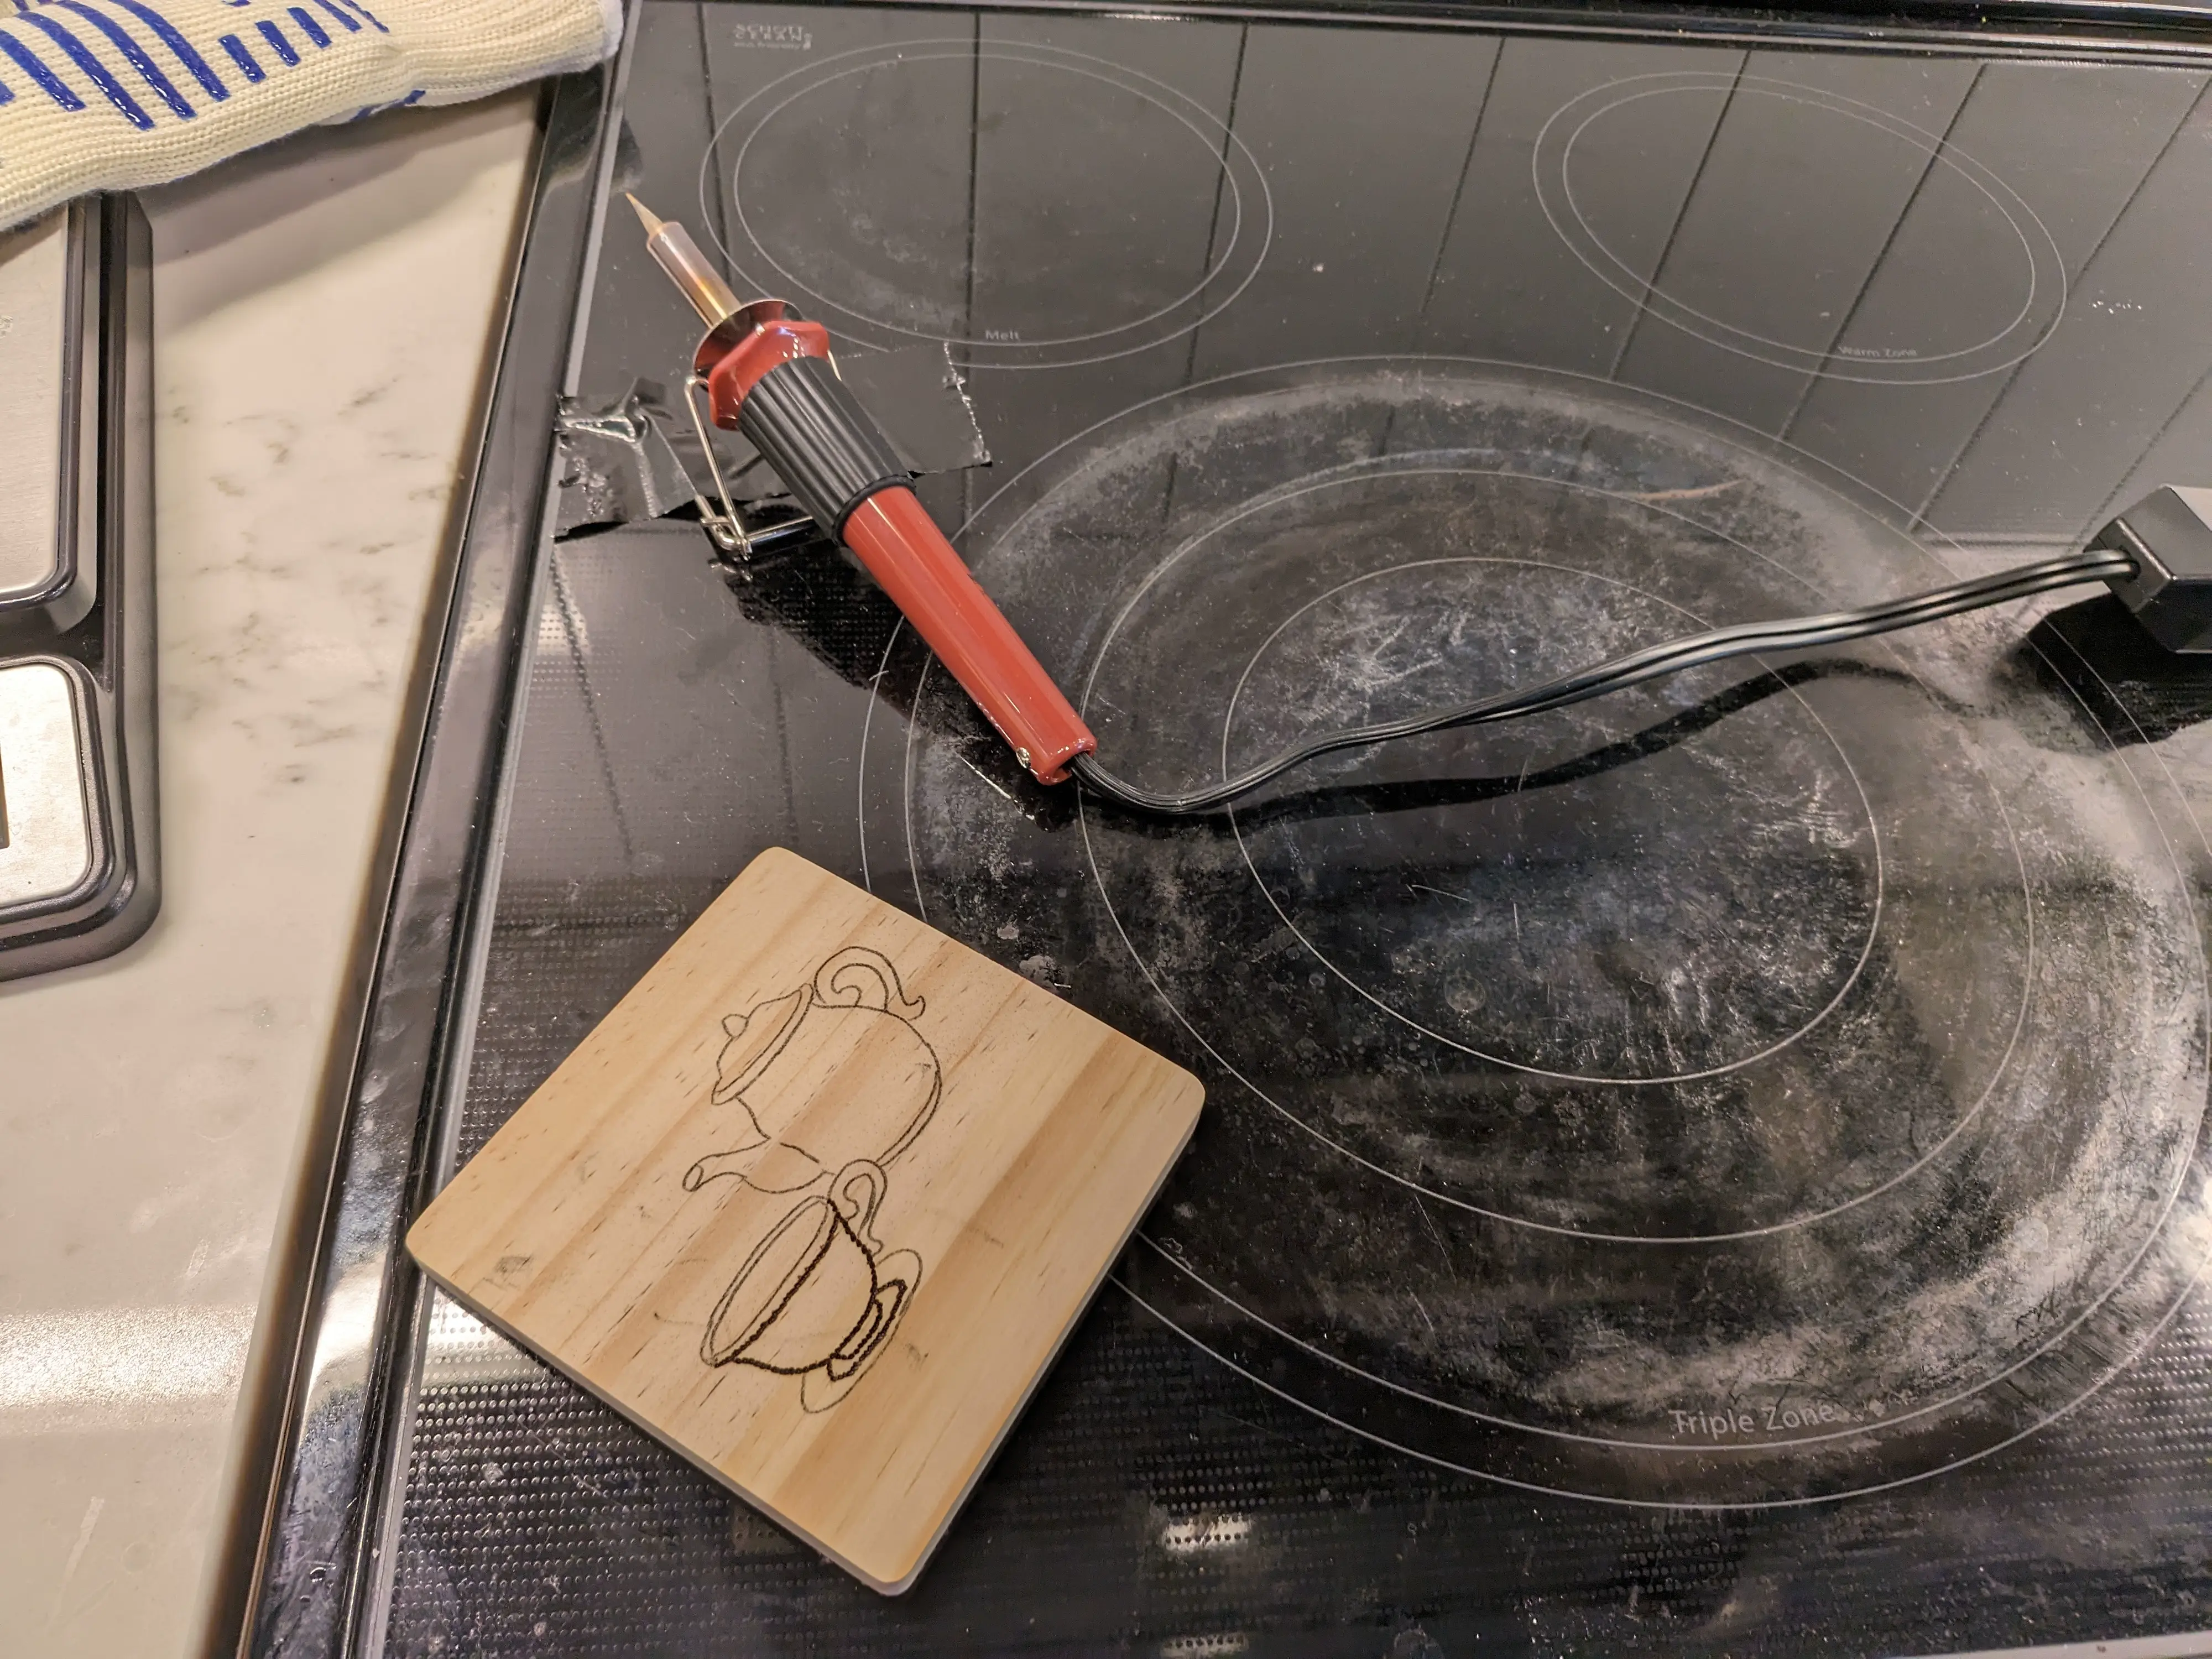 Image showing a wood burning tool resting on a stove being used like a table, with an in-progress coaster in the foreground.